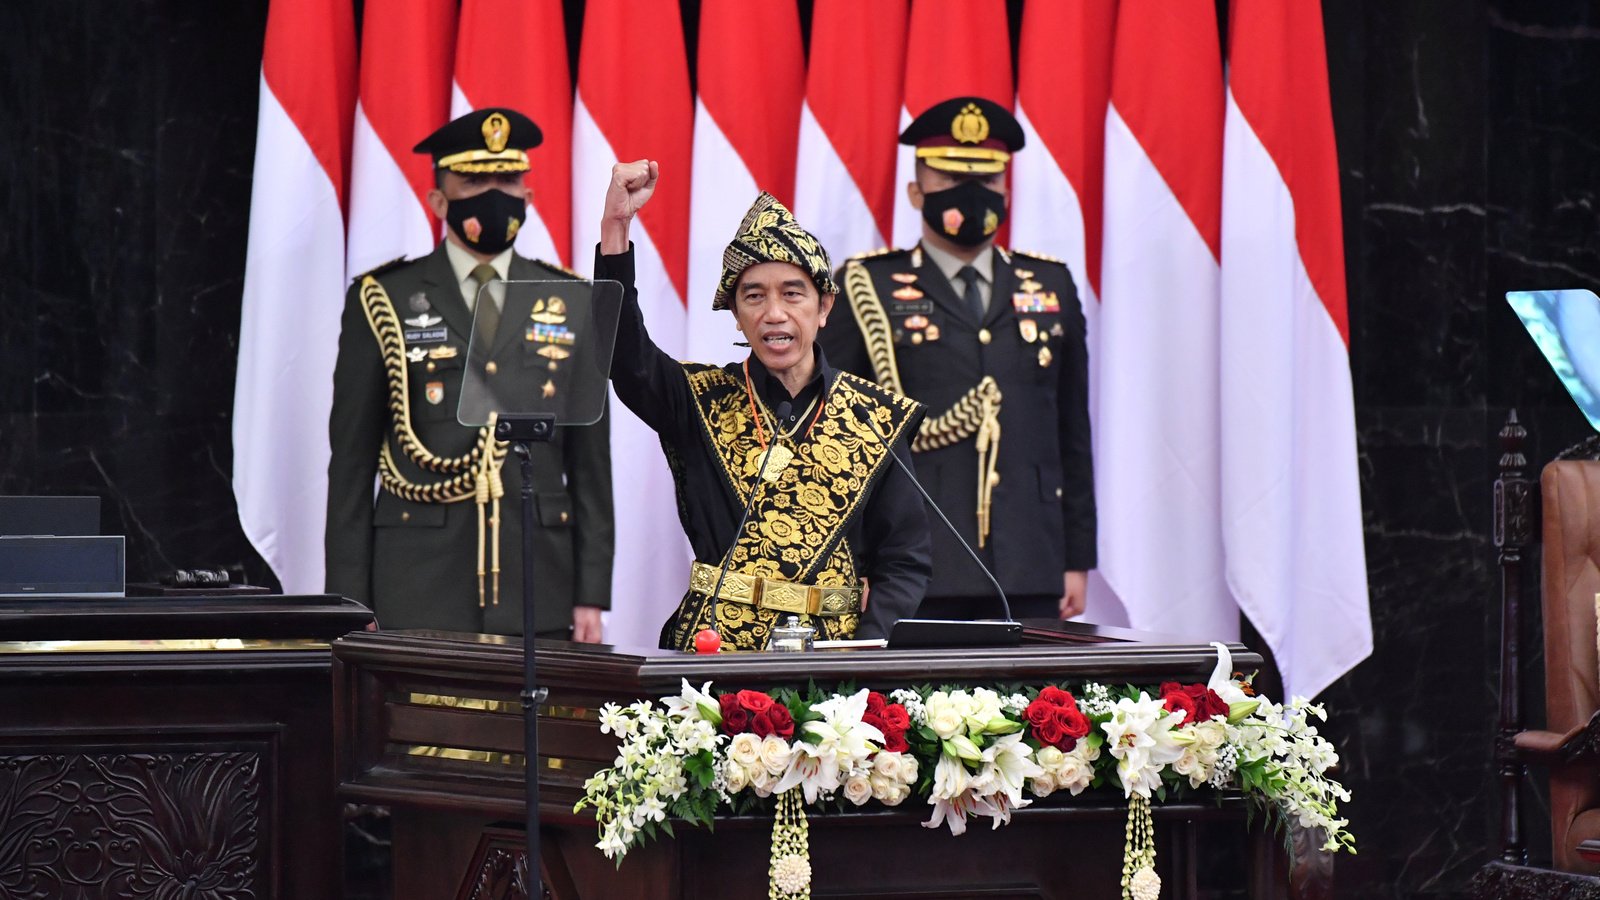 A Review of “Man of Contradictions: Joko Widodo and the Struggle to Remake Indonesia” by Ben Bland | Council on Foreign Relations